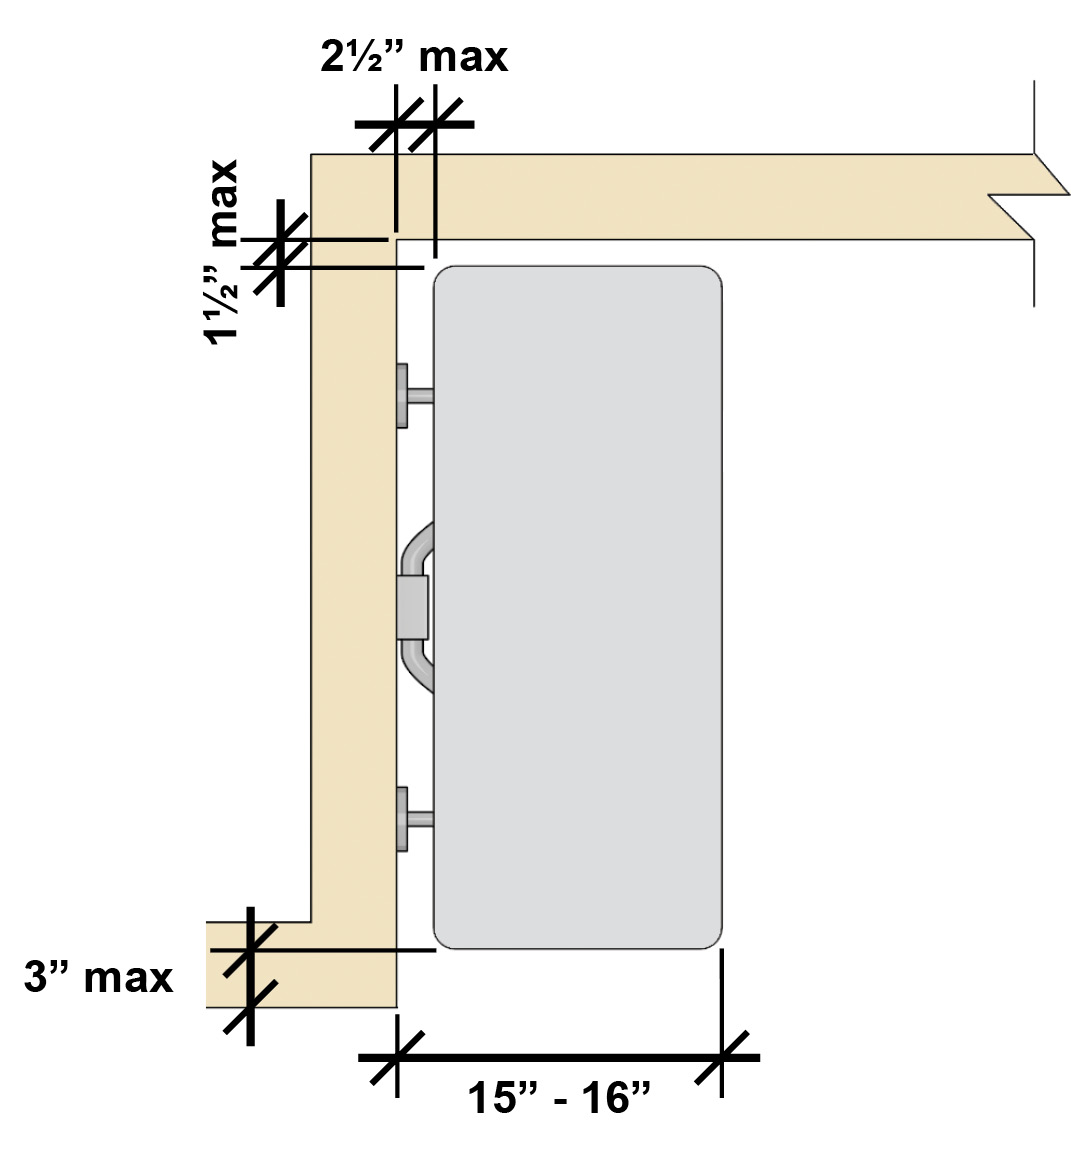 Rectangular shower seat with a rear edge that is 2½ inches max. from the seat wall and a front edge 15 inches to 16 inches from the seat wall. The side edge is 1 ½ inches from the adjacent wall. The seat must extend to a point within 3 inches of the compartment entry.